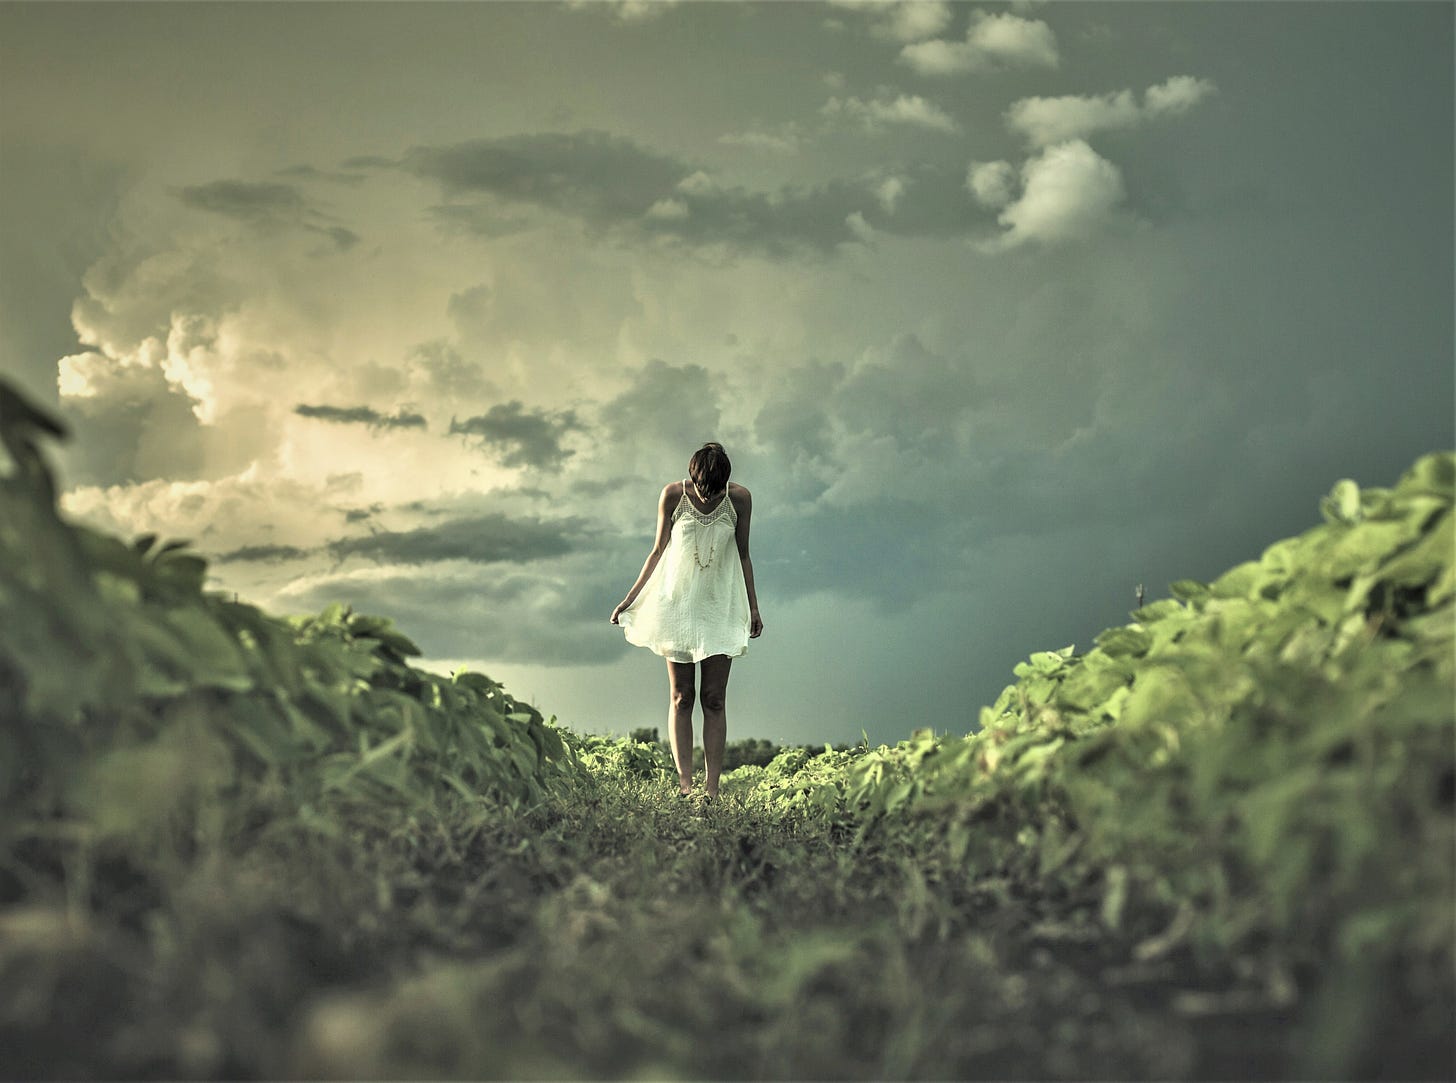 girl in white flowy dress standing in grassy valley with stormy cloudy sky behind her